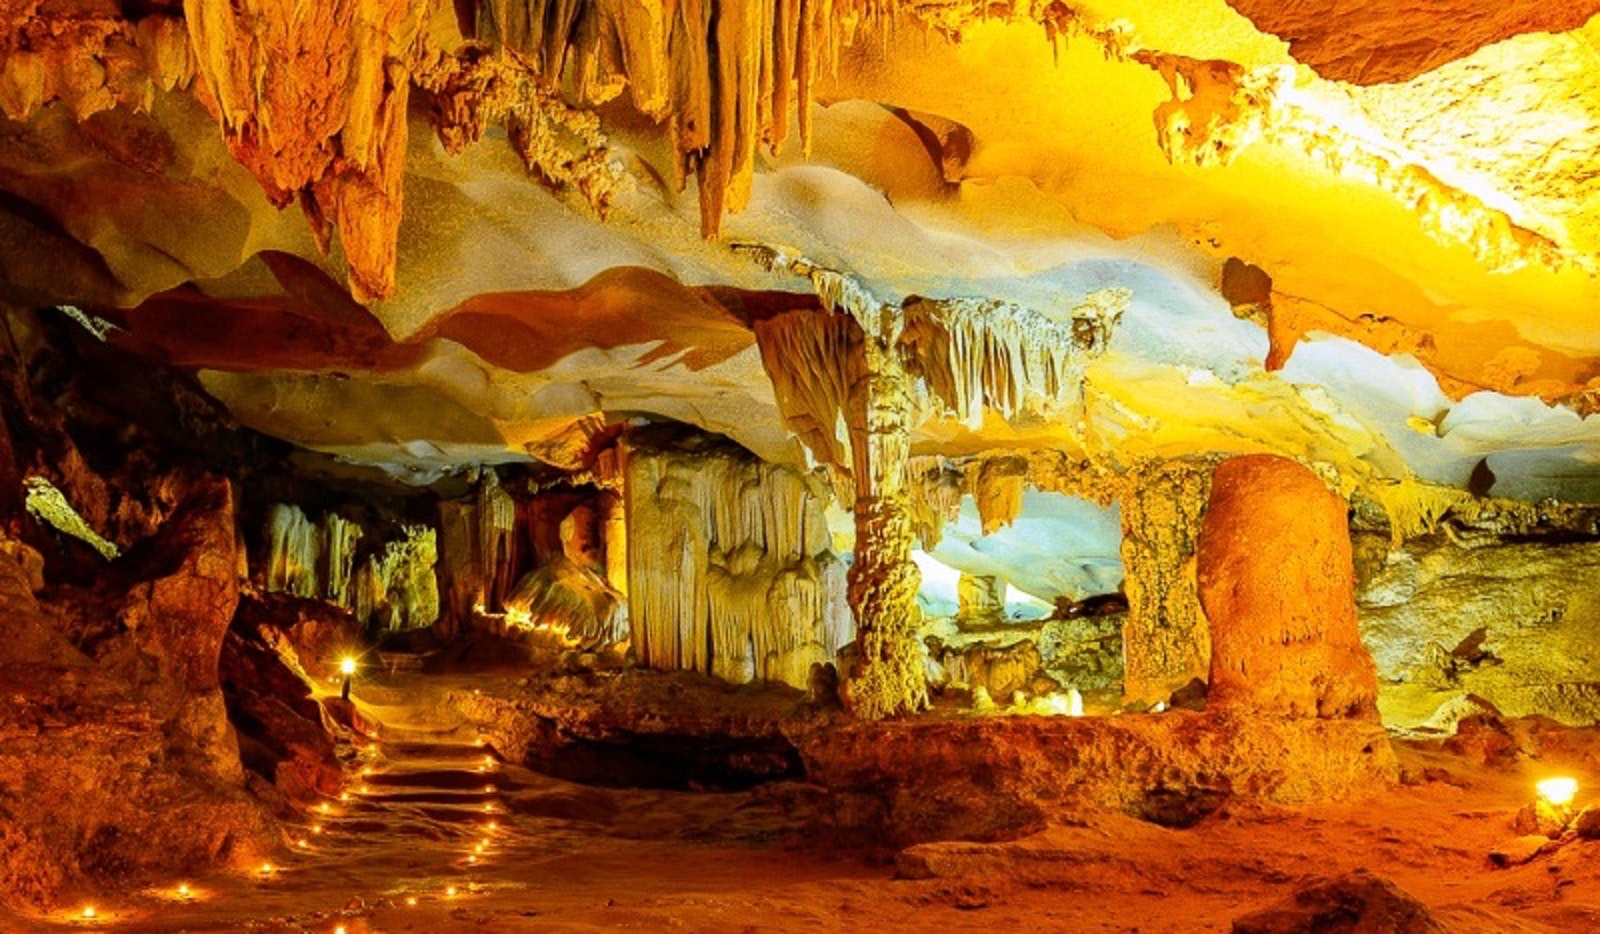 thien canh son cave halong bay cruise 3 day 2 night